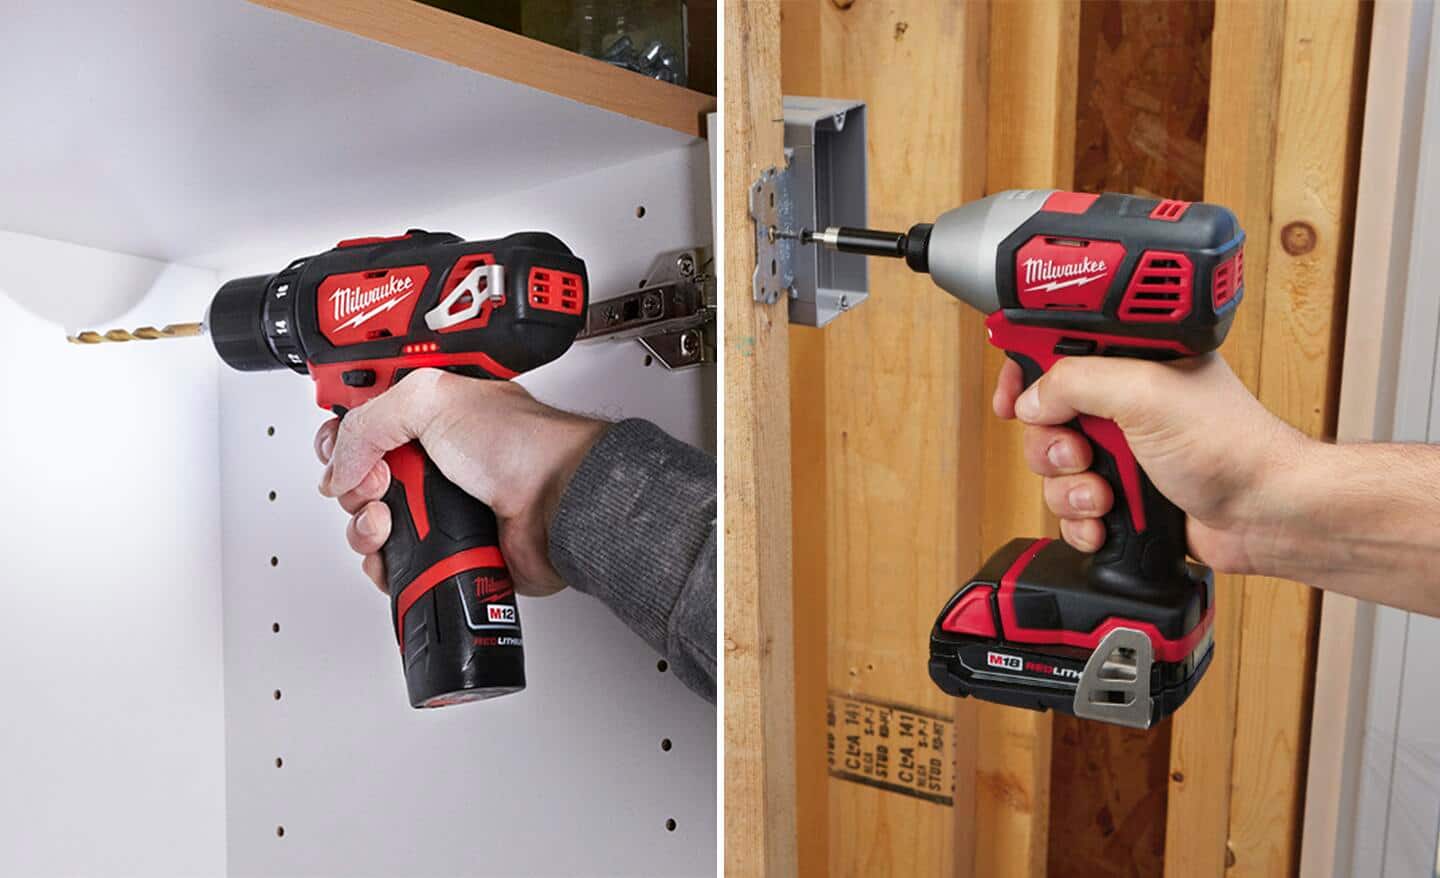 A side by side image of 12 volt and 18 volt cordless tools.